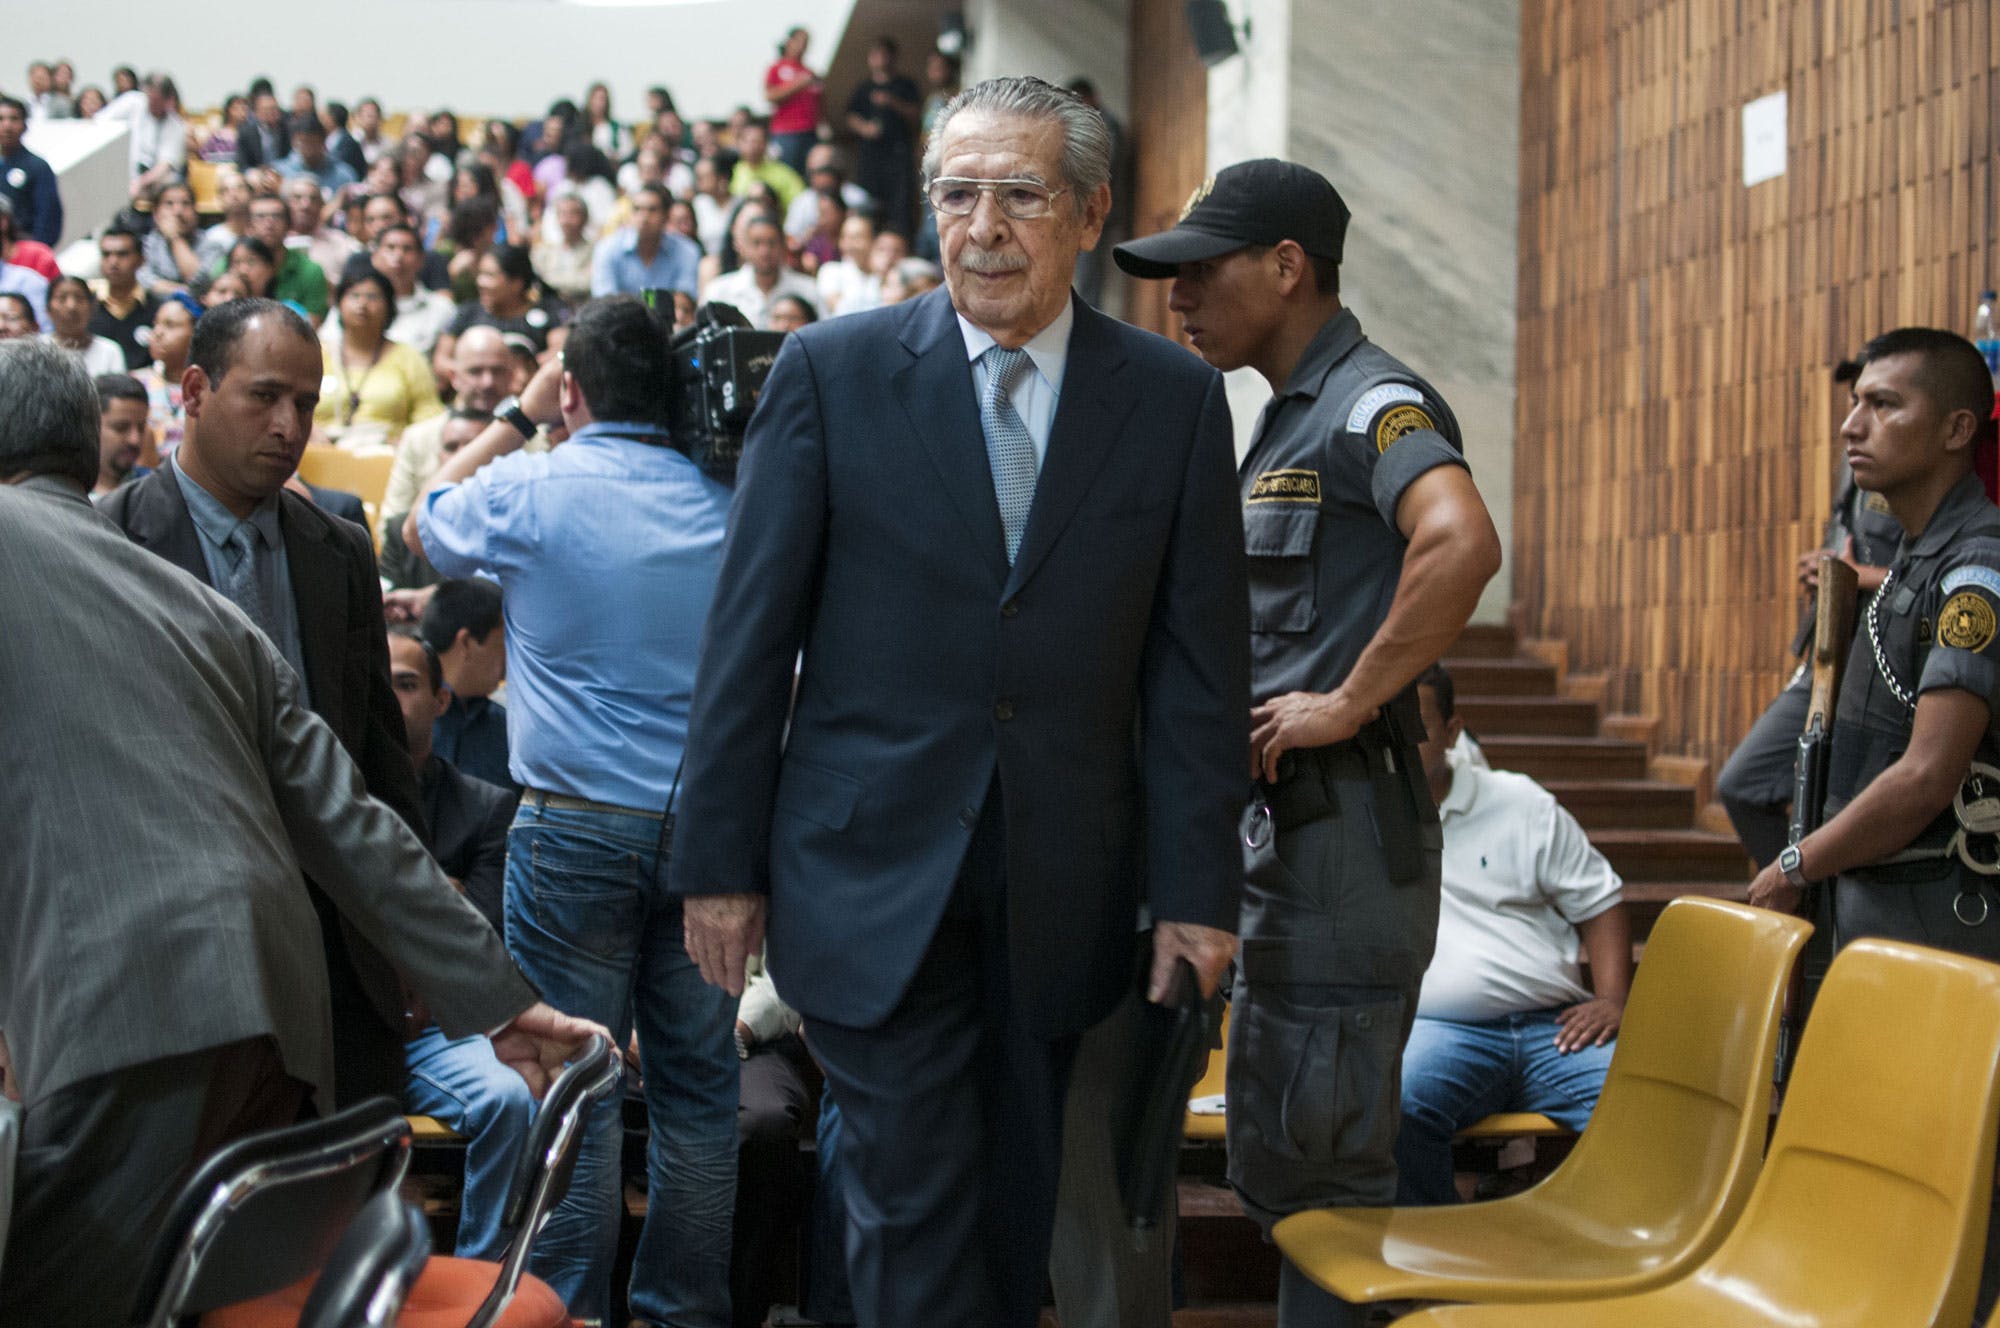 Guatemala's former dictator General Efraín Ríos Montt enters the court after Tribunal President Yasmin Barrios announced that judges overseeing the trial will not accept another judge's ruling that the case should start over, one day after a judge ordered the suspension of the genocide trail against Rios Montt and General Jose Mauricio Rodriguez Sanchez in Guatemala City, Friday, April 19, 2013. Rios Montt seized power in a March 23, 1982 coup, and ruled until he himself was overthrown just over a year later. Prosecutors say that while in power he was aware of, and thus responsible for, the slaughter by subordinates of at least 1,771 Ixil Mayas in San Juan Cotzal, San Gaspar Chajul and Santa Maria Nebaj, towns in the Quiche department of Guatemala's western highlands. (AP Photo/Luis Soto)